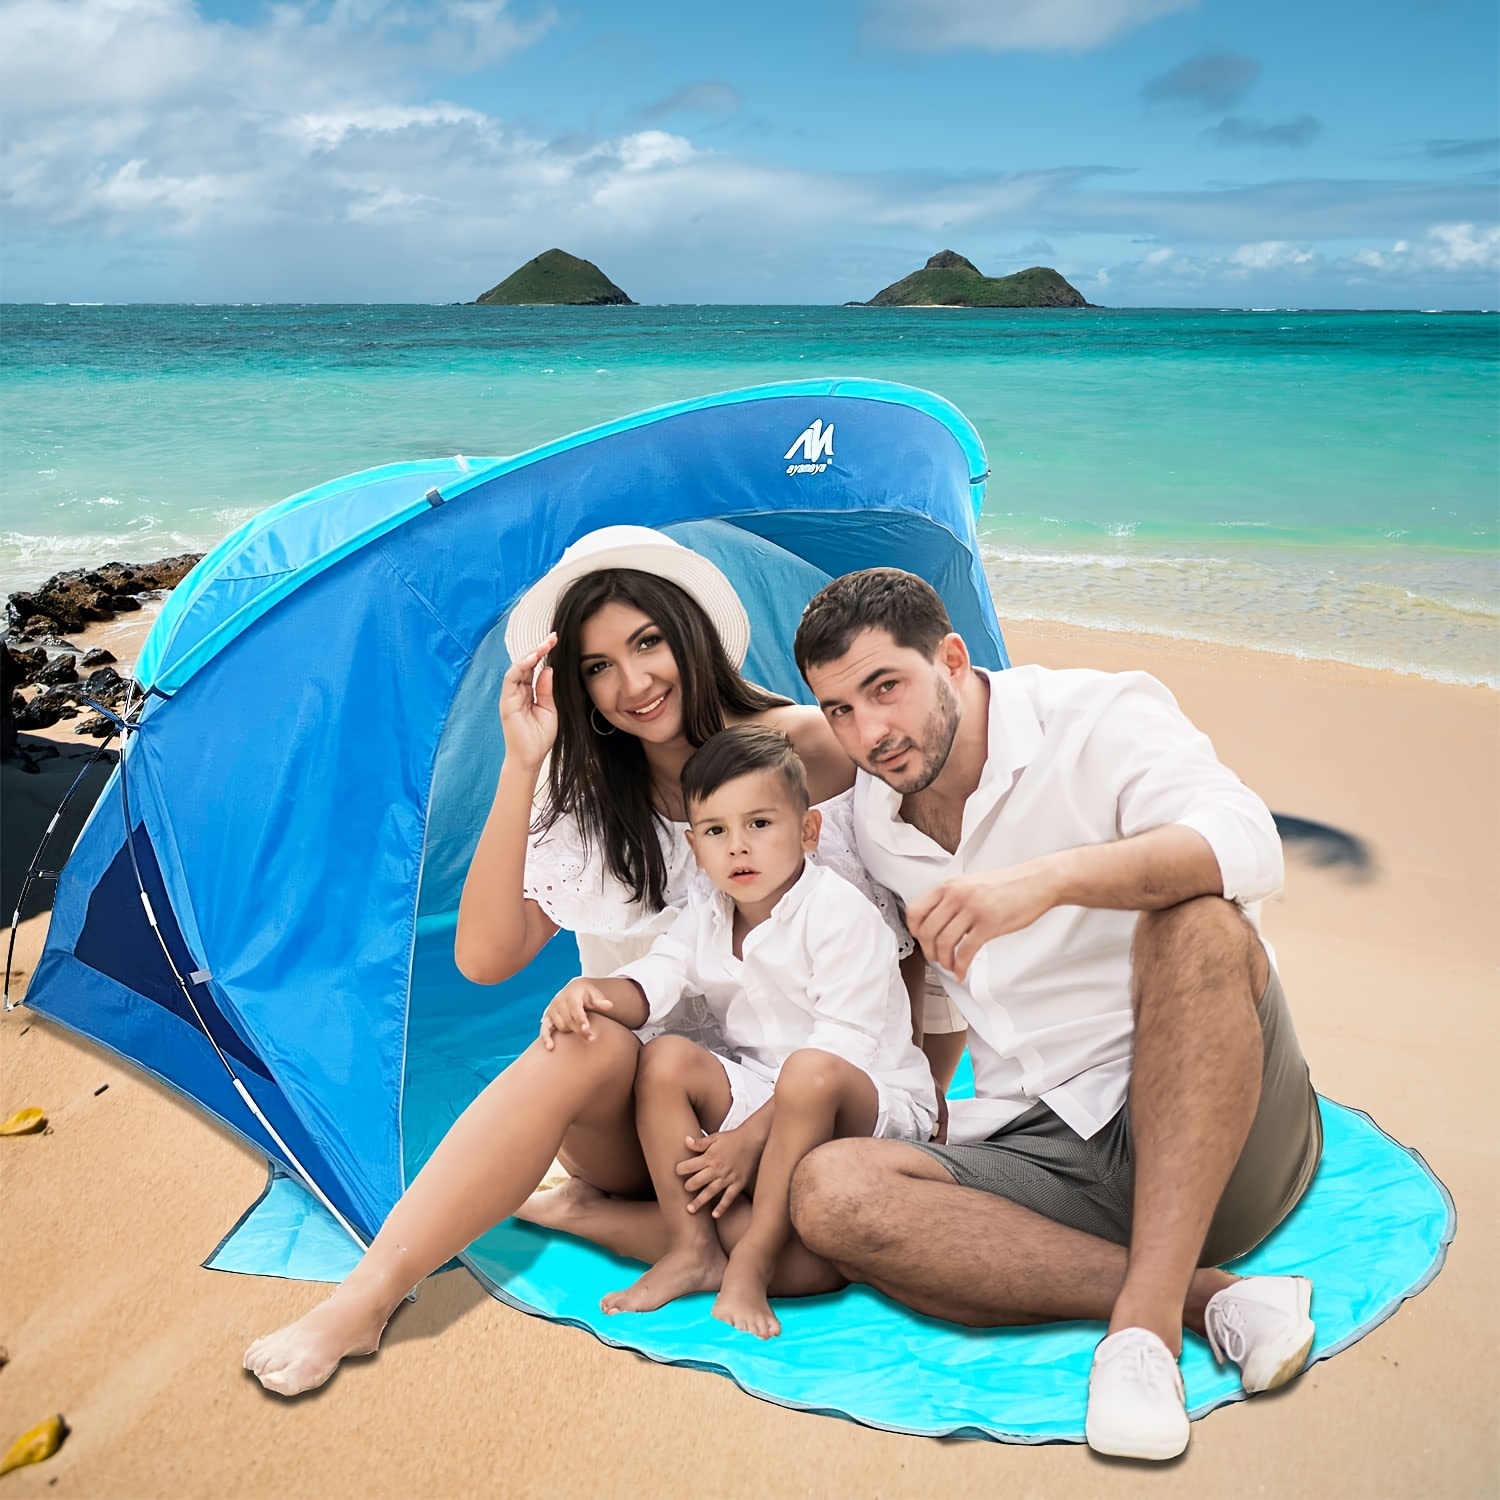  Upgraded - Patented Design Beach Tent 10.5' x 11.5